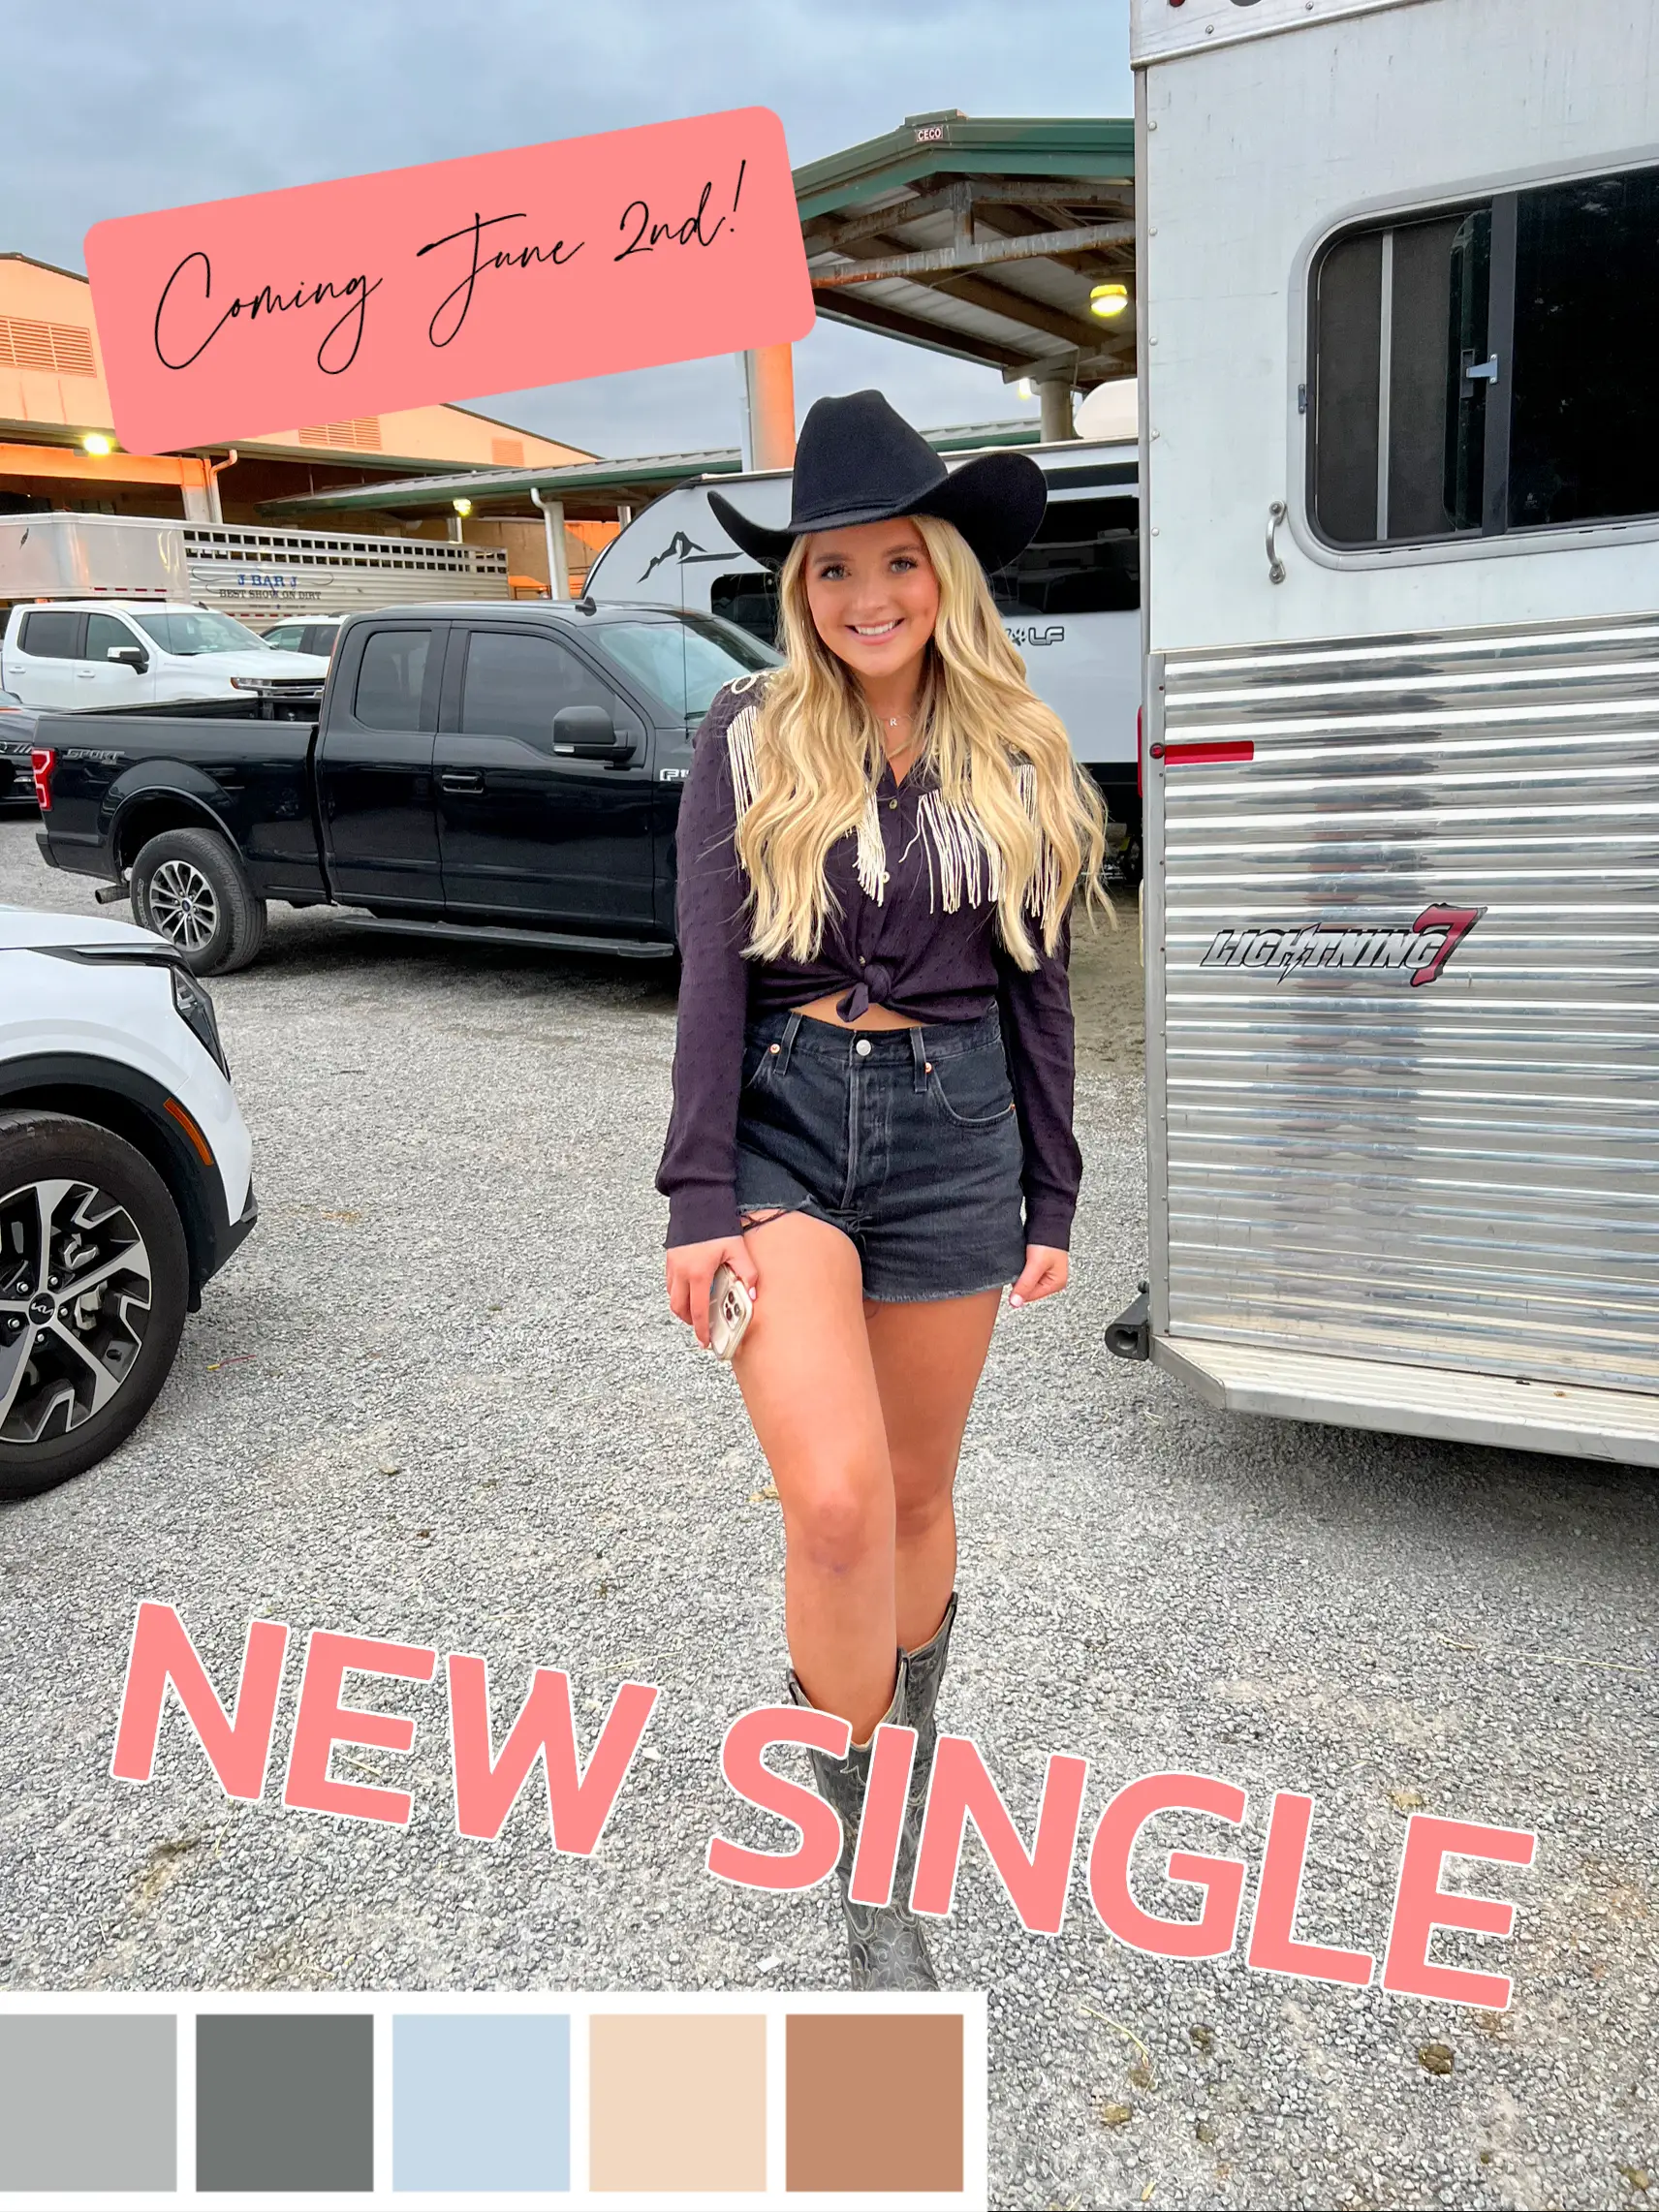 New Single Coming June 2nd!'s images